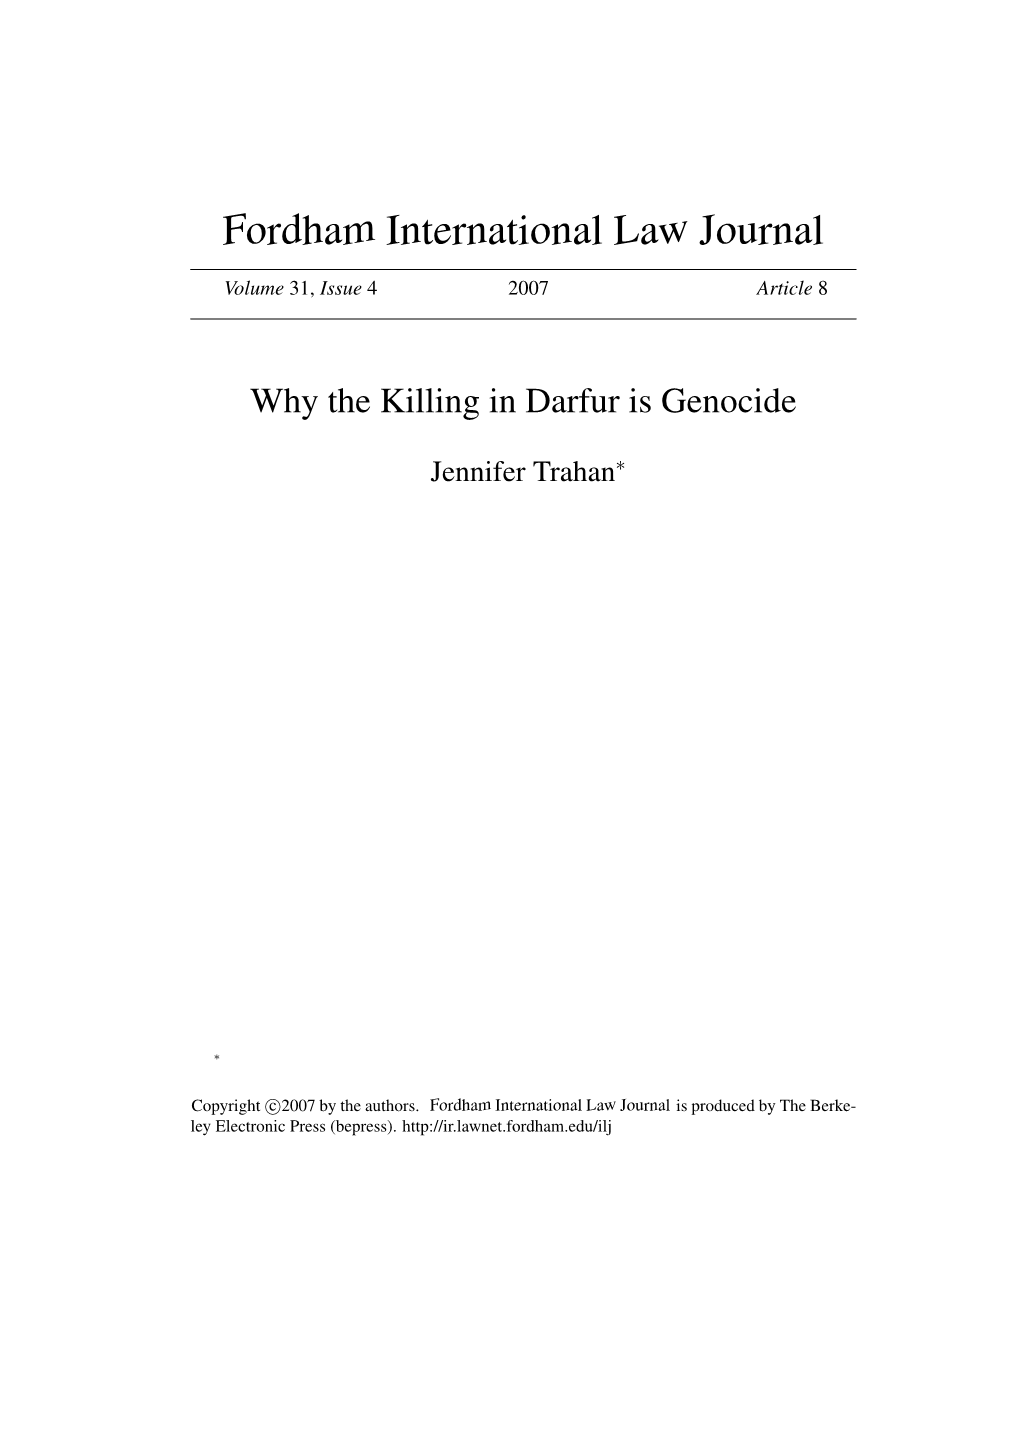 Why the Killing in Darfur Is Genocide